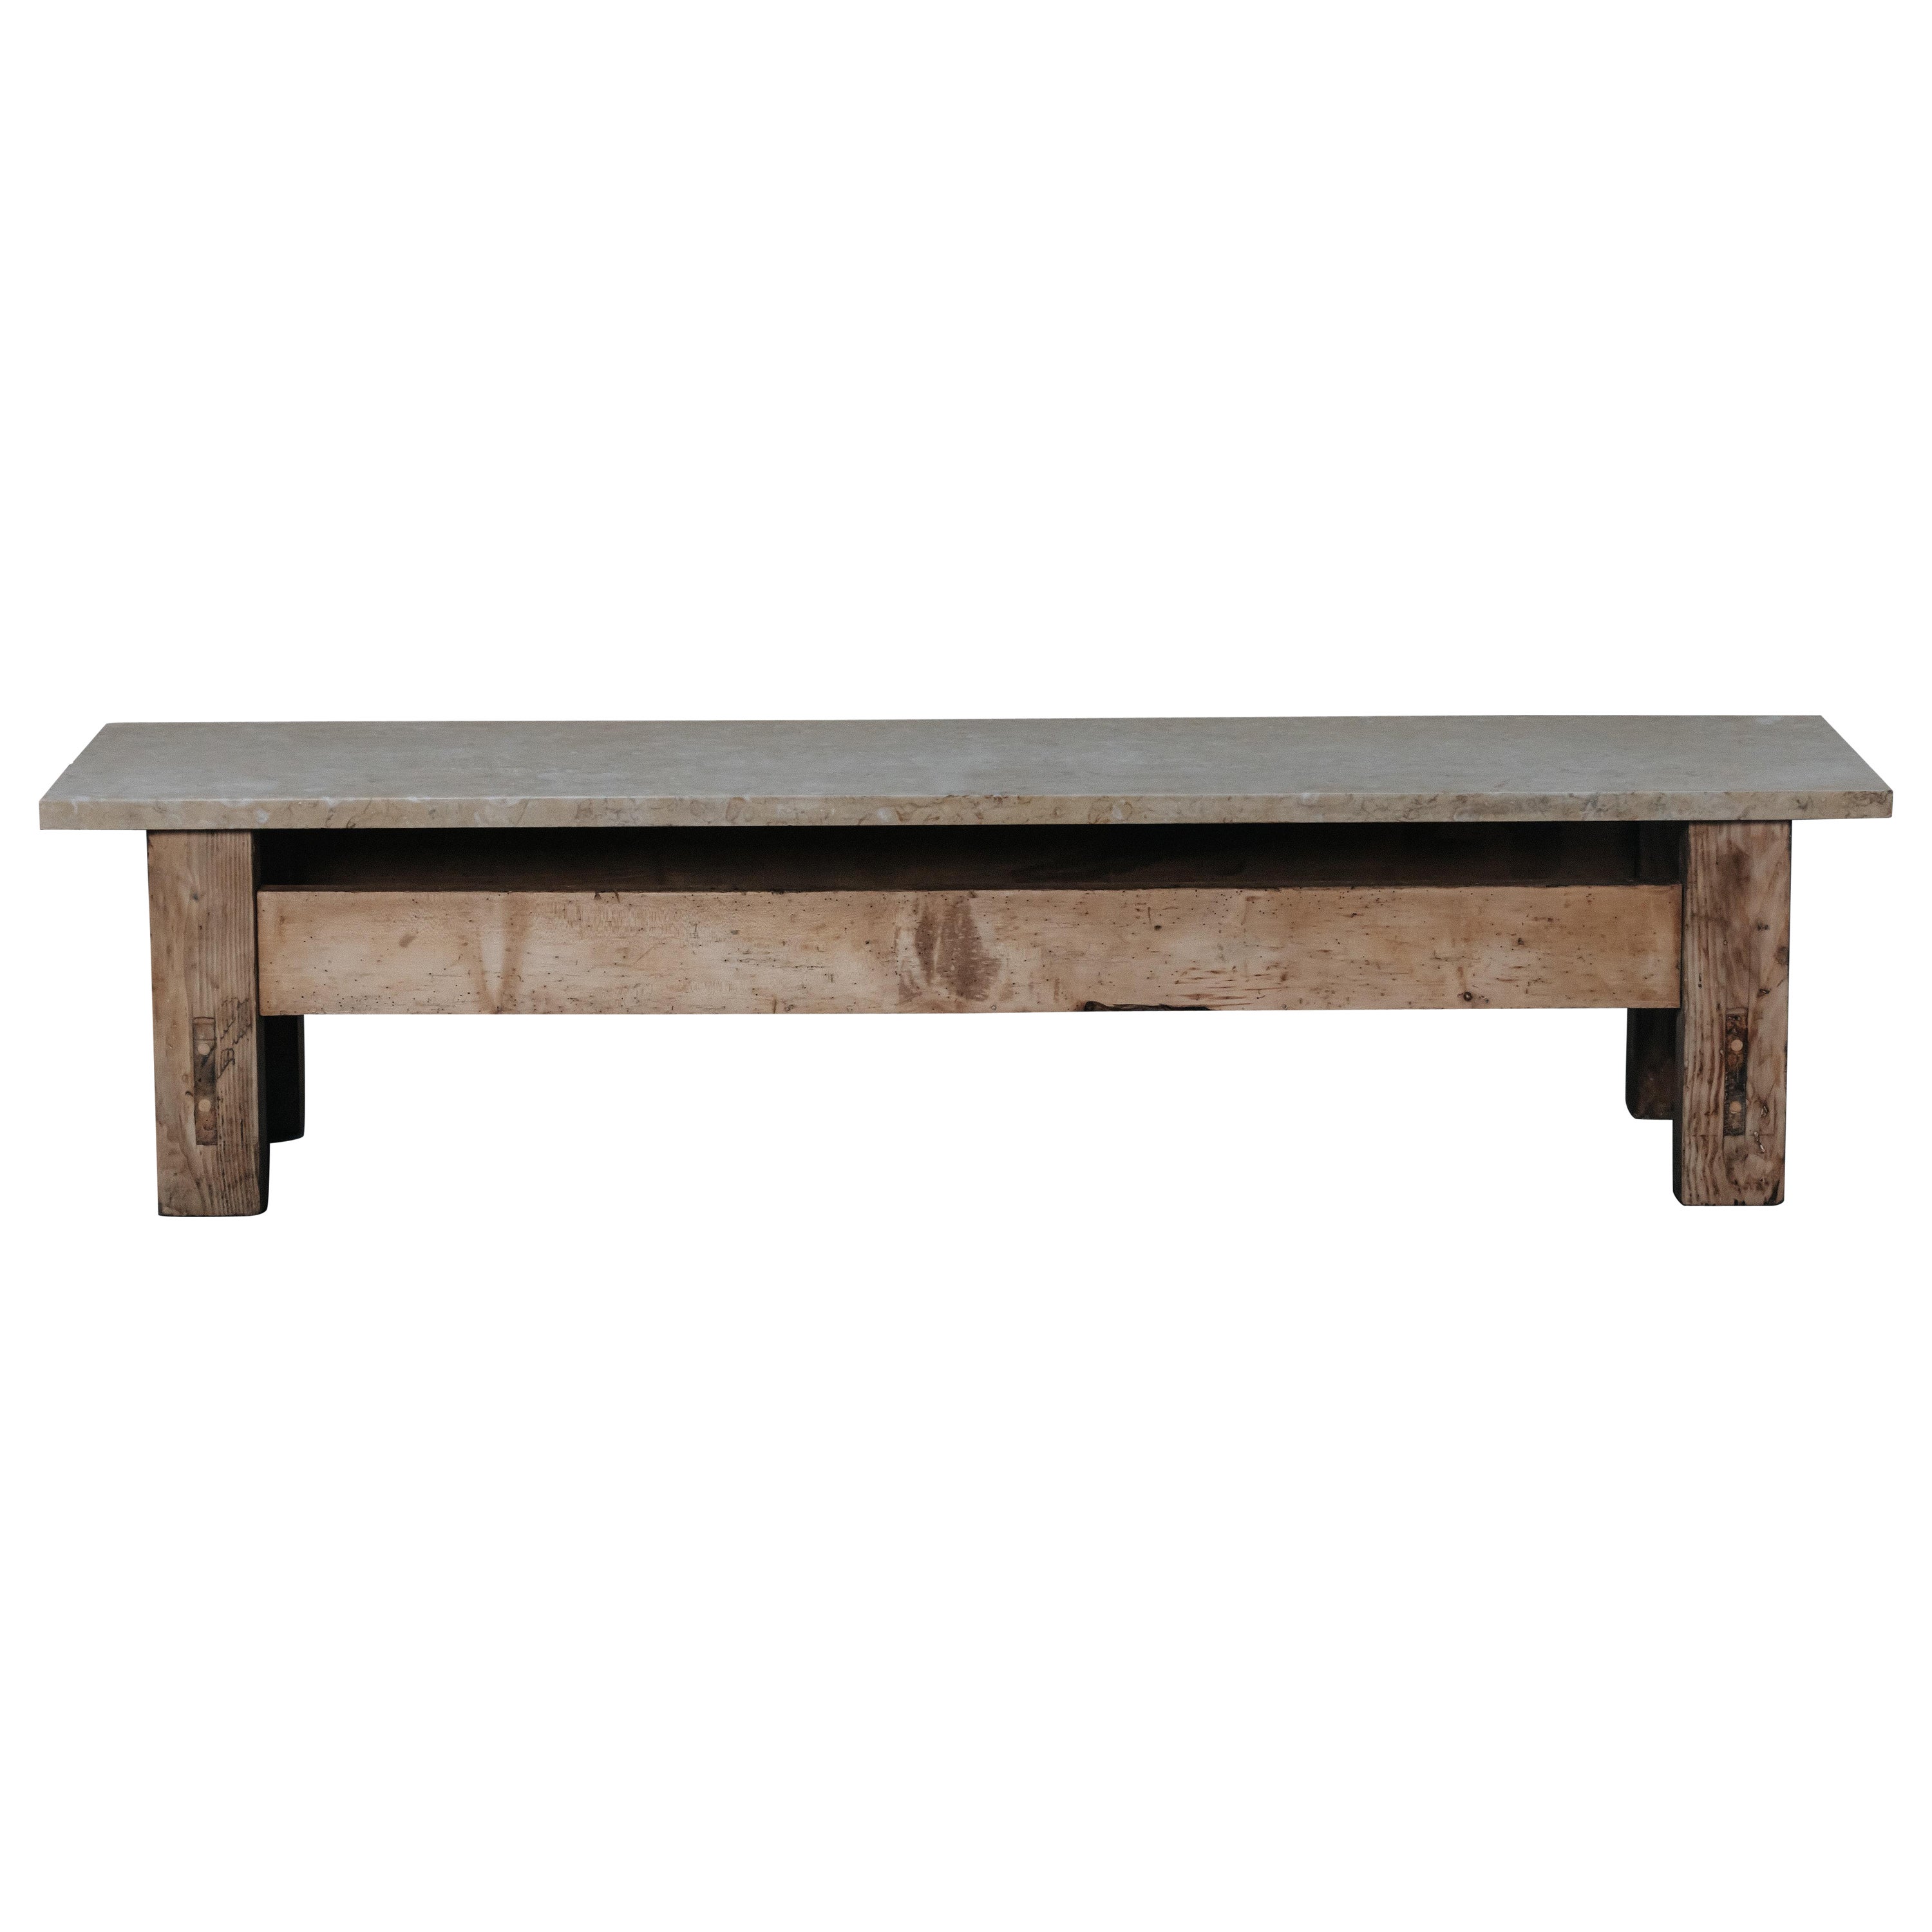 Vintage Oak And Marble Coffee Table From France, Circa 1970s For Sale